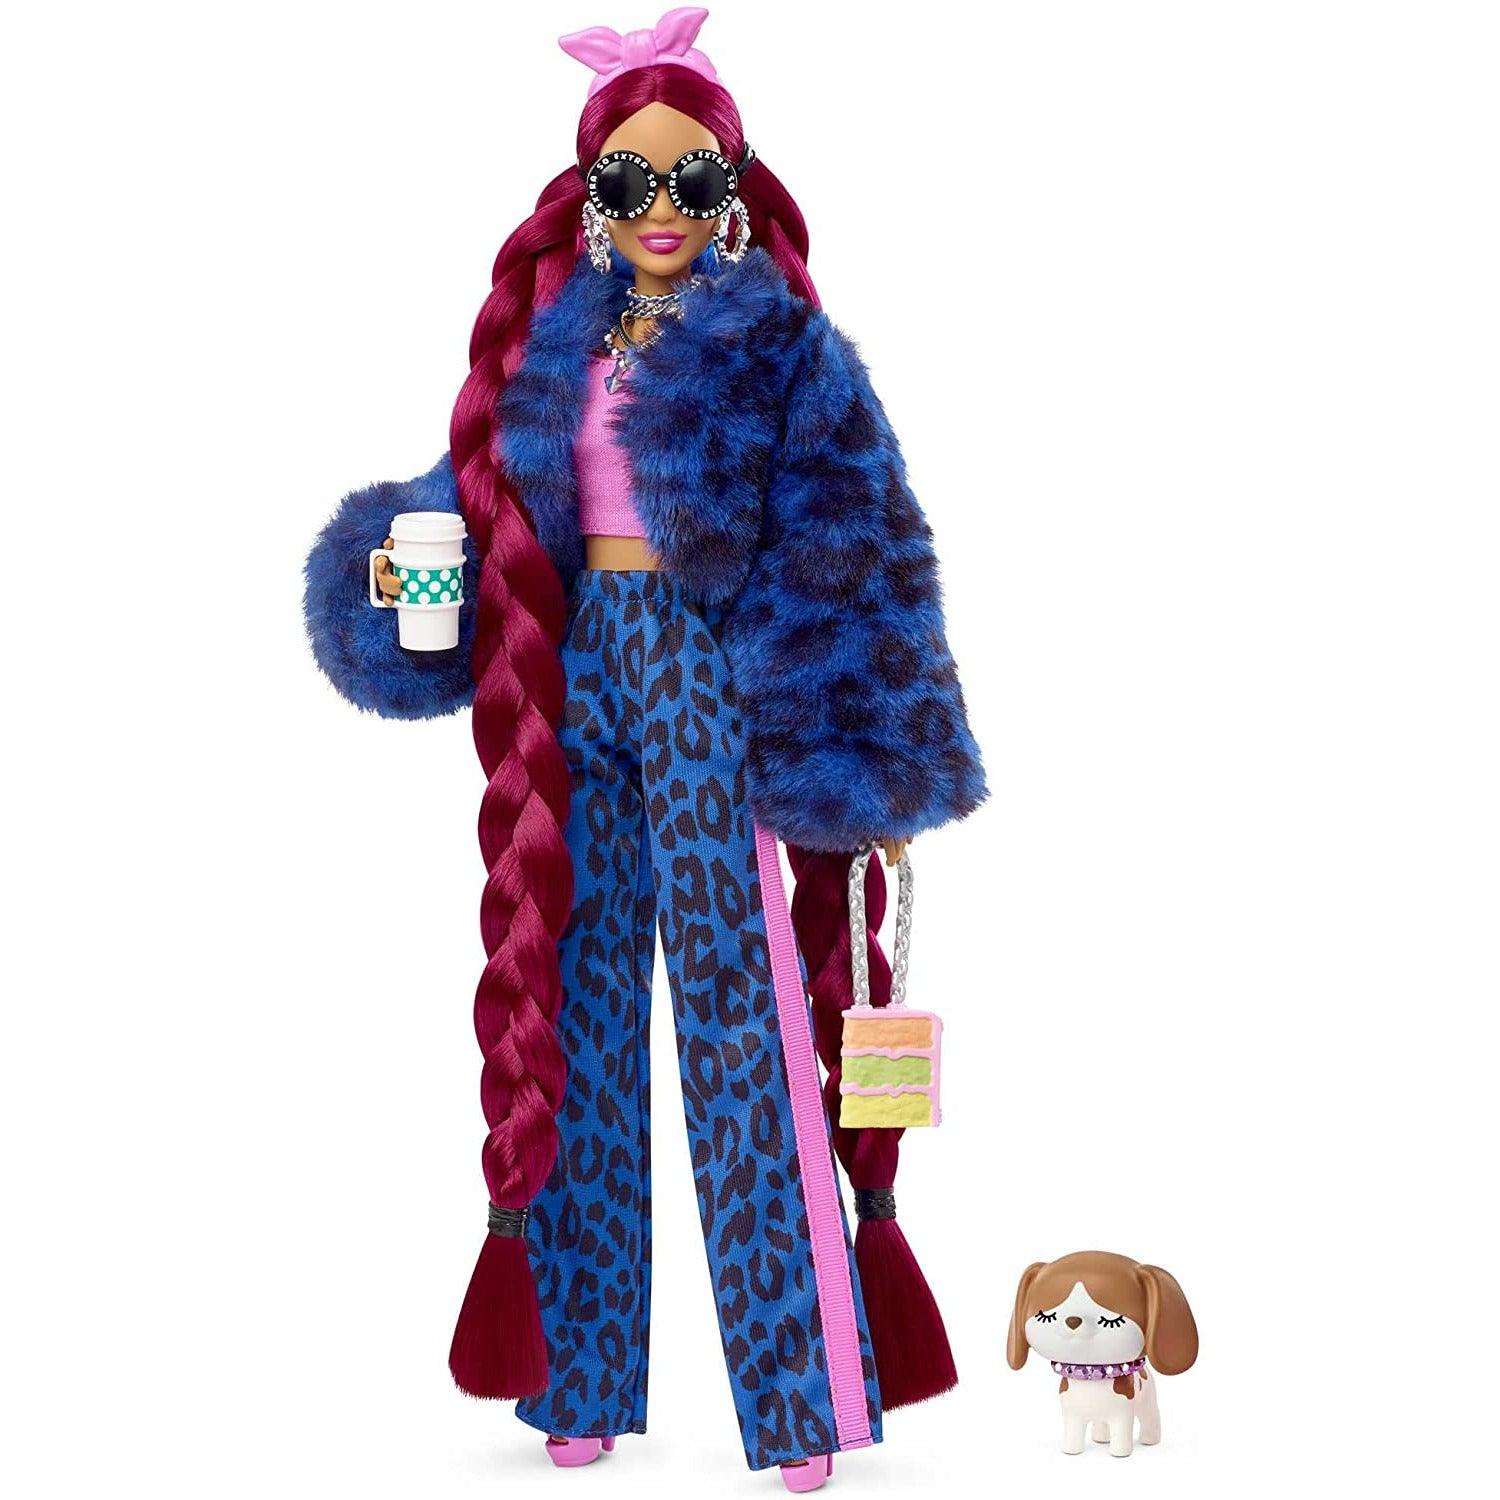 Barbie Extra Doll #17 Fashion Doll with Burgundy Braids and Furry Jacket, Pet Puppy